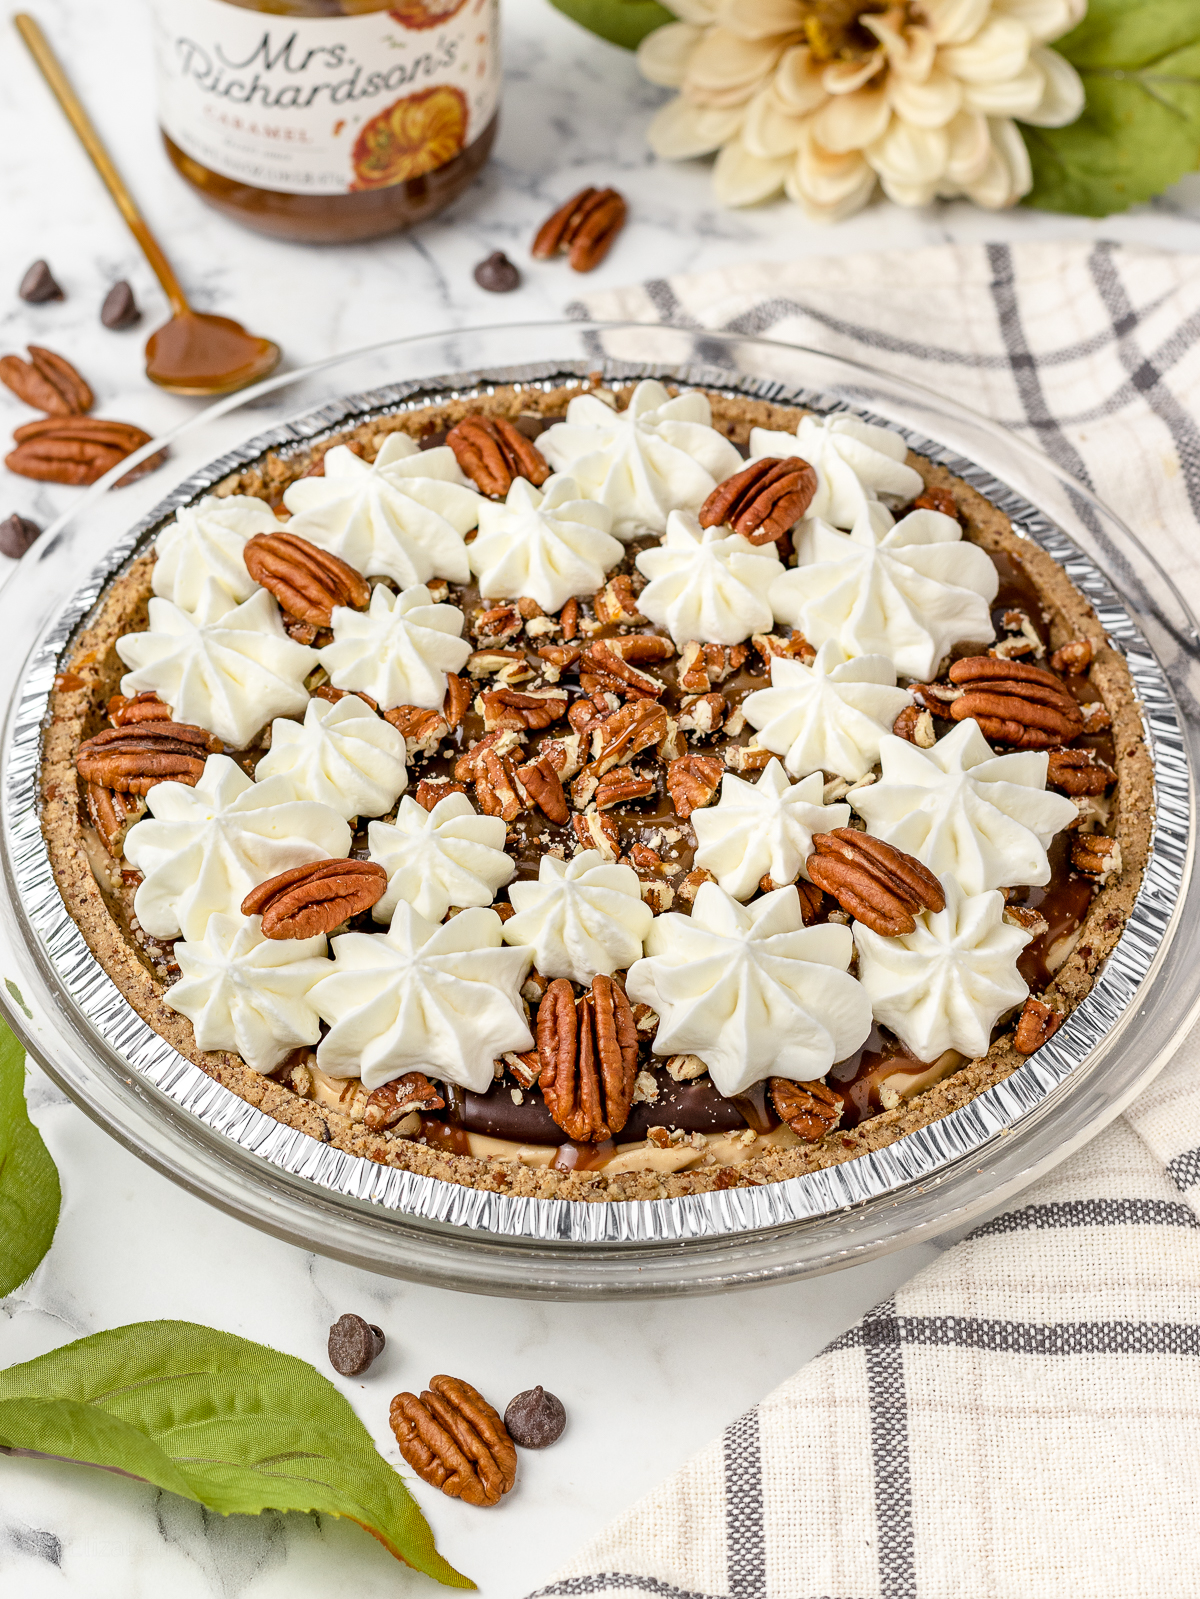 Pie topped with more caramel sauce, pecans, and whipped cream. Pecan halves and caramel cream sauce on the side.